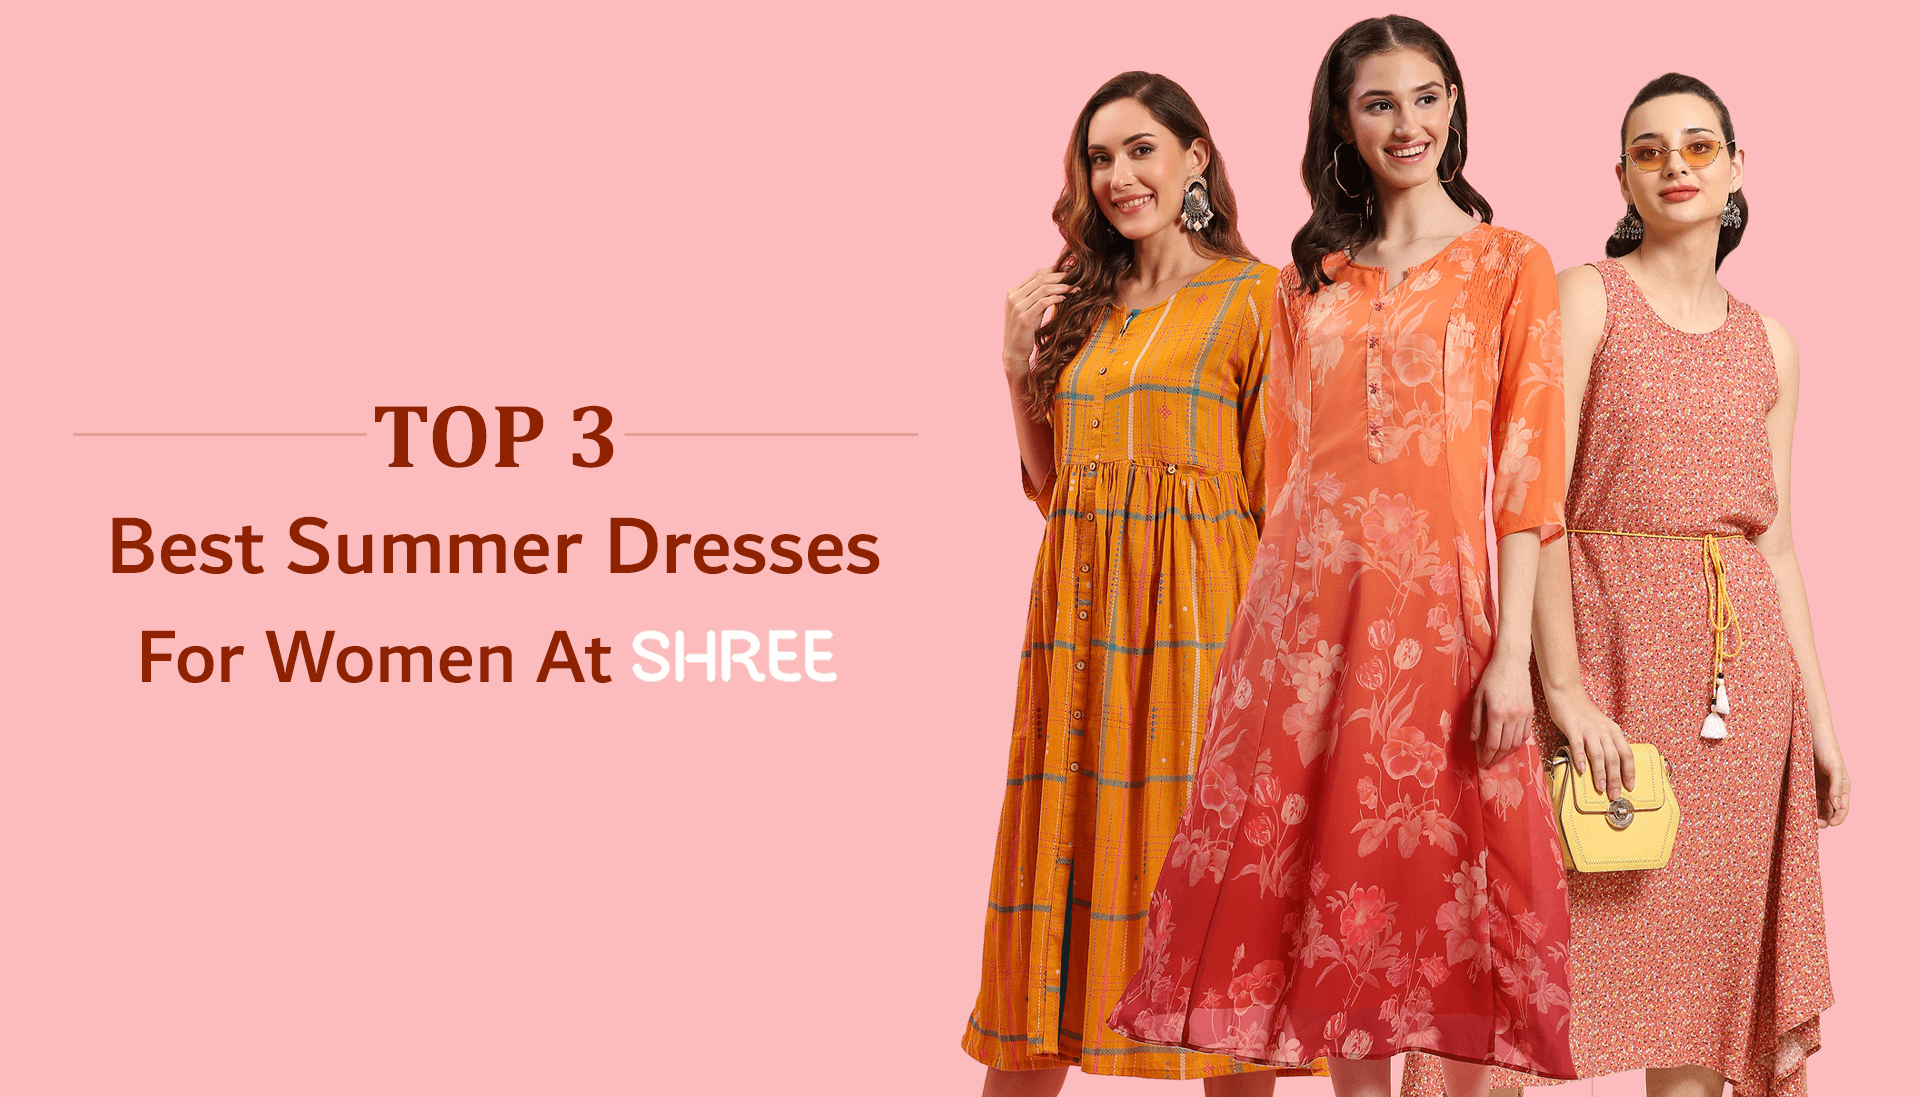 Most Comfortable Summer Dresses for Women- Check Out the Top Picks